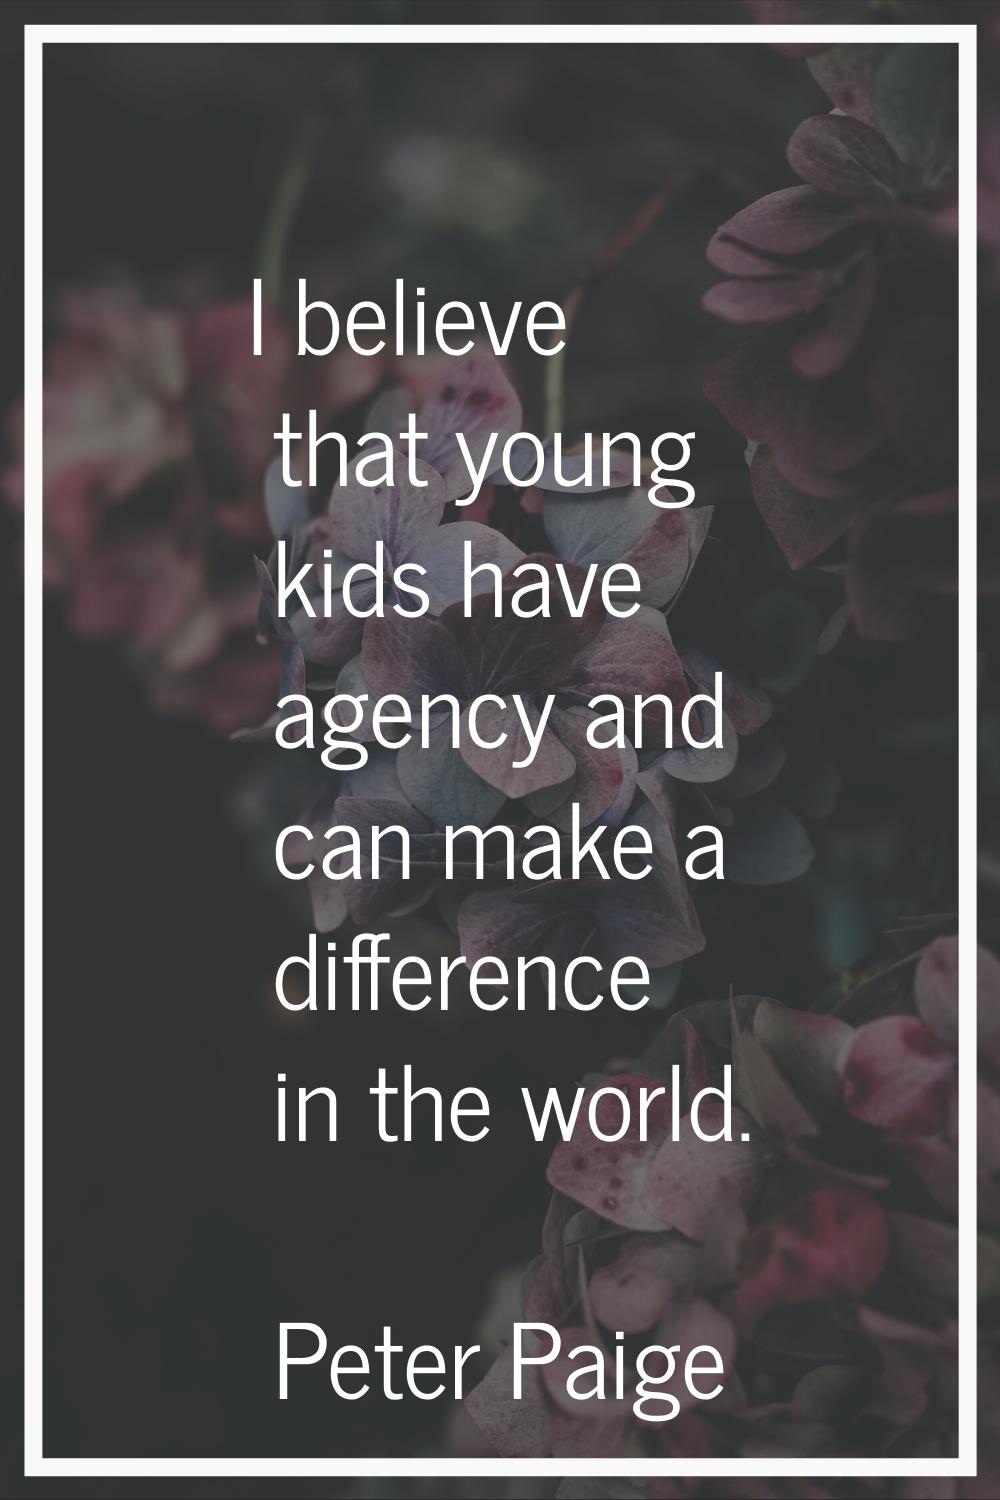 I believe that young kids have agency and can make a difference in the world.